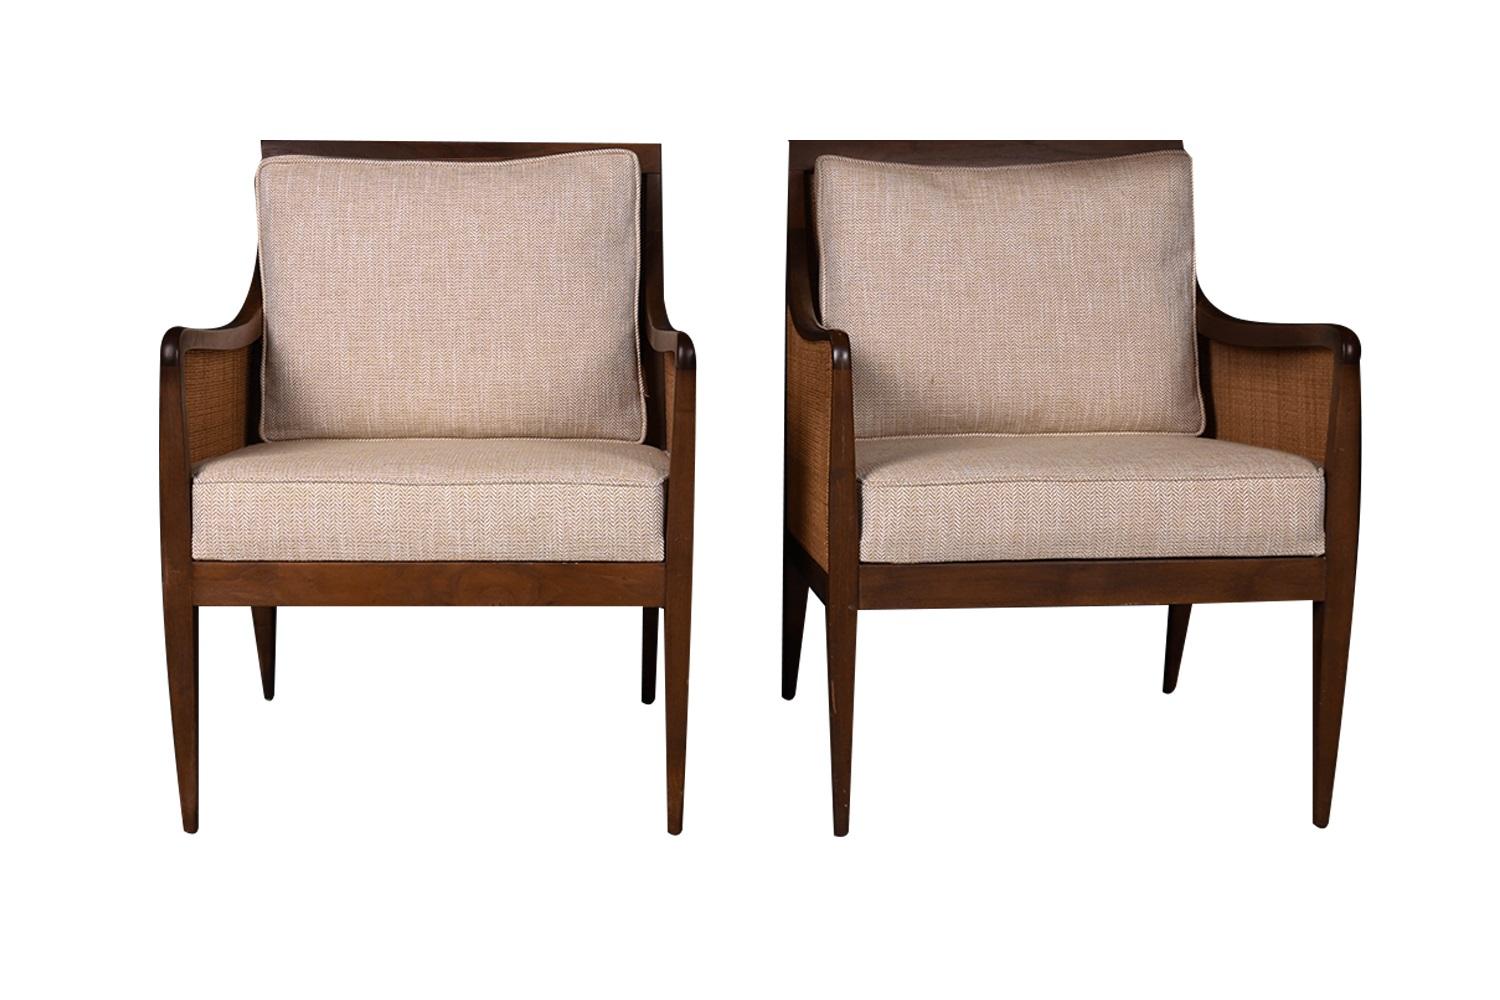 An extraordinary pair of walnut and cane newly upholstered lounge chairs designed by the distinguished architect Kipp Stewart for Directional circa 1950's, part of Directional's Country Villa collection. This elegant pair of newly upholstered